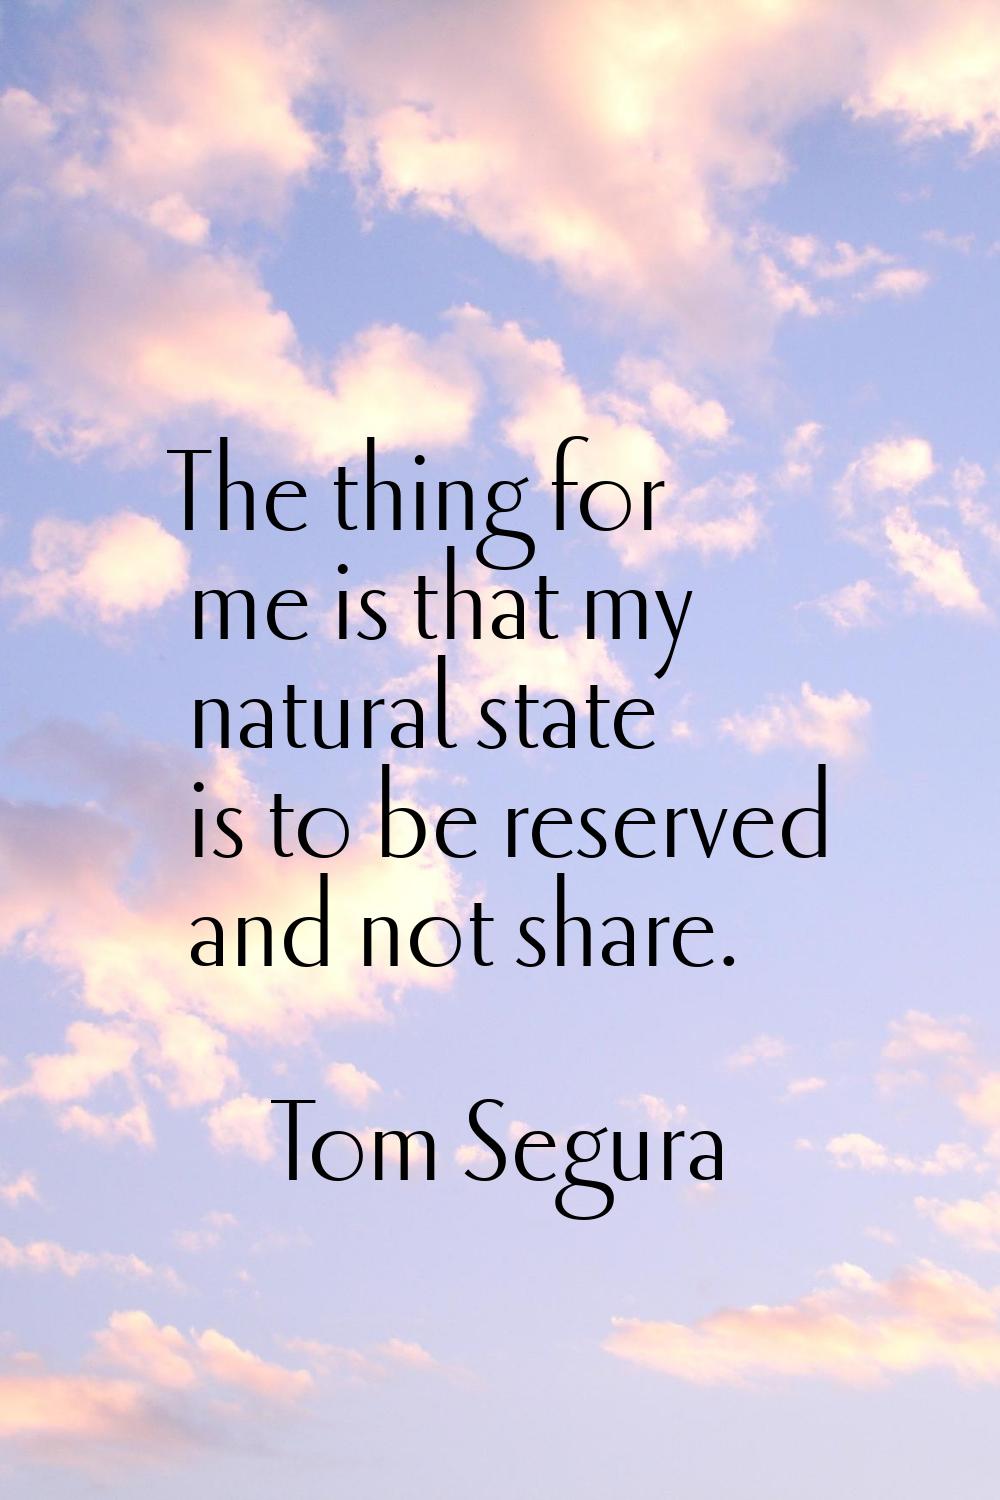 The thing for me is that my natural state is to be reserved and not share.